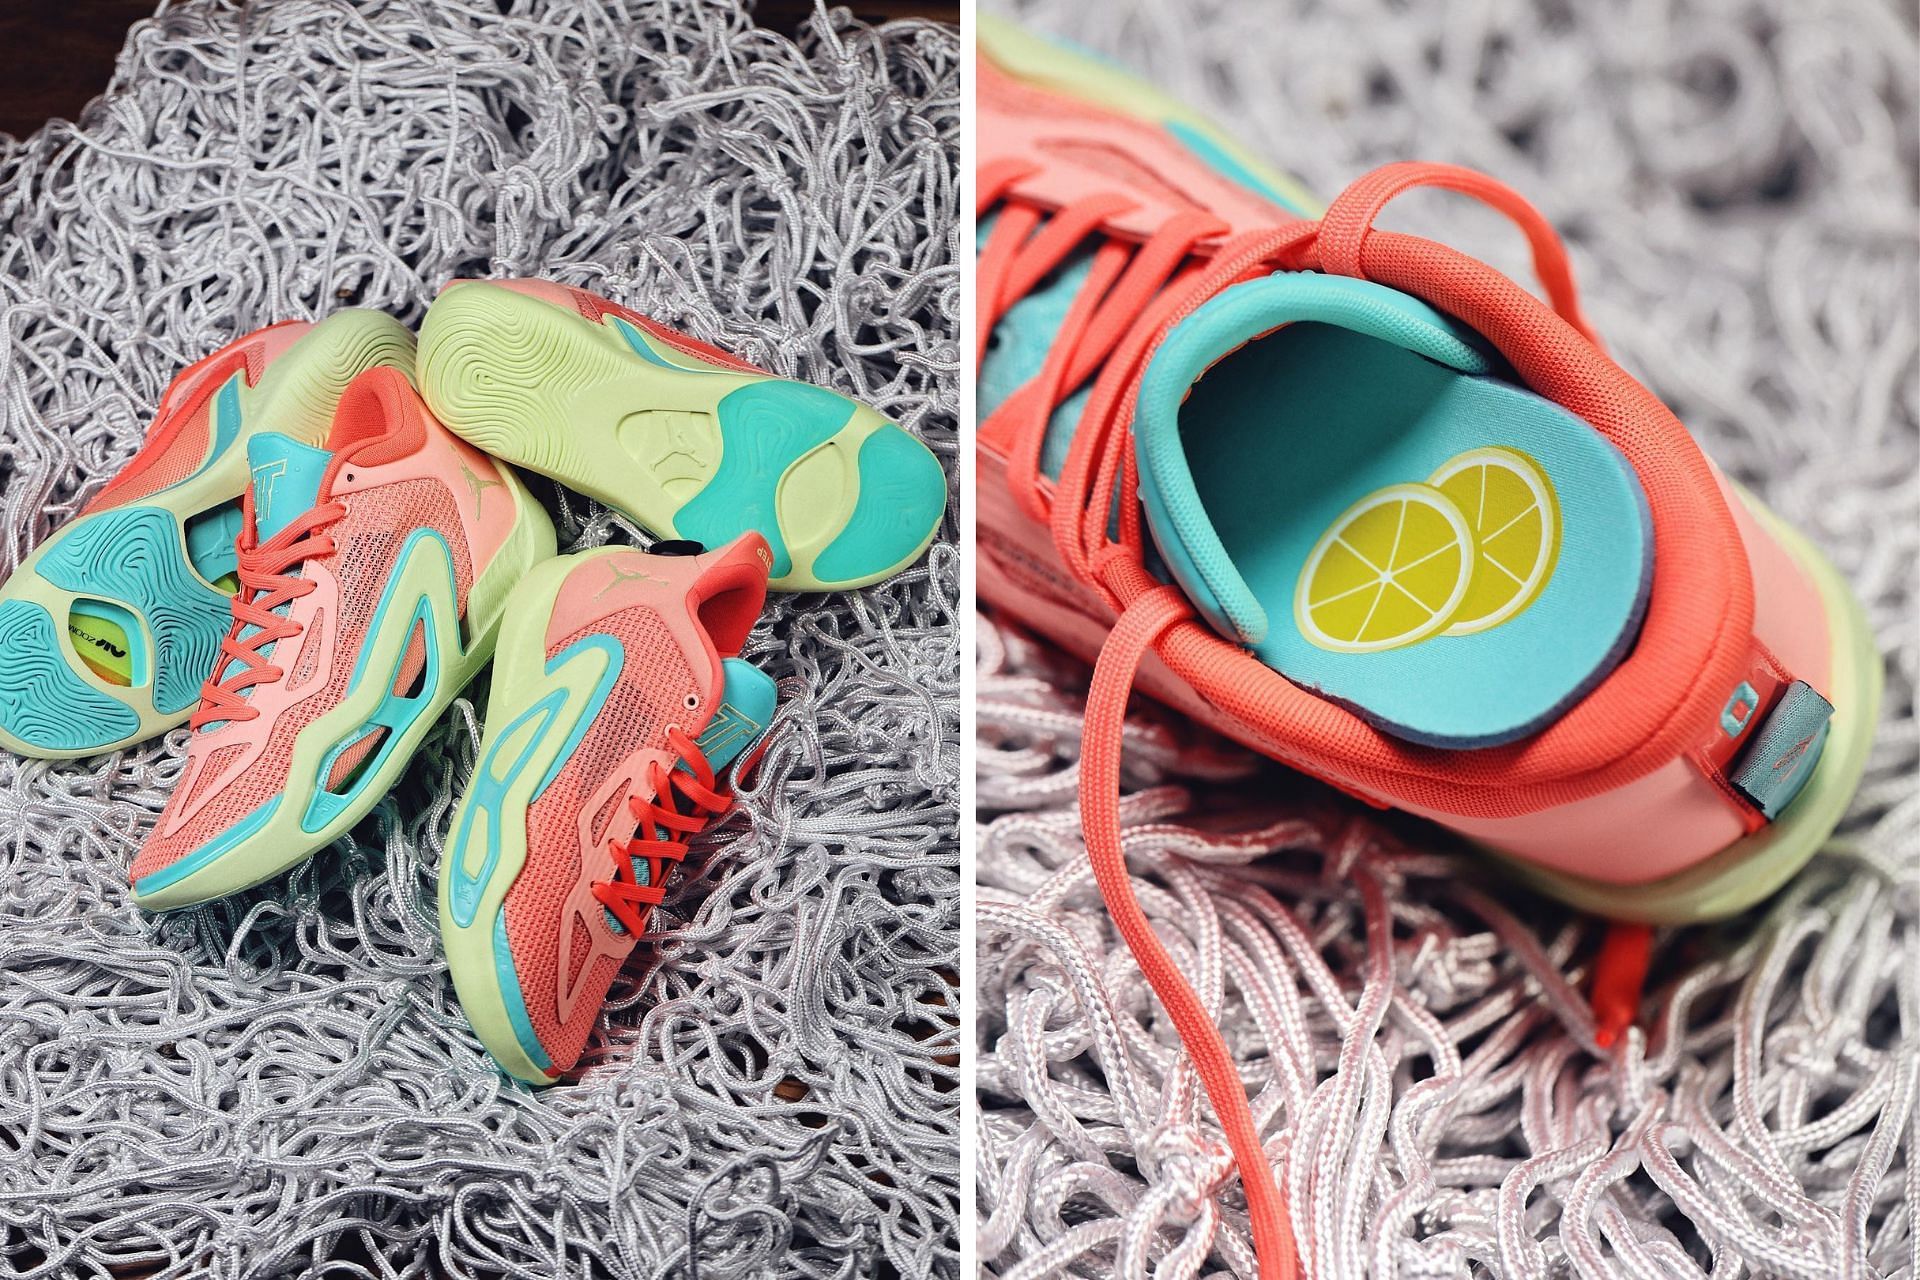 The insoles of these vibrant sneakers are stamped with lemon motifs (Image via Twitter/@justfreshkicks)